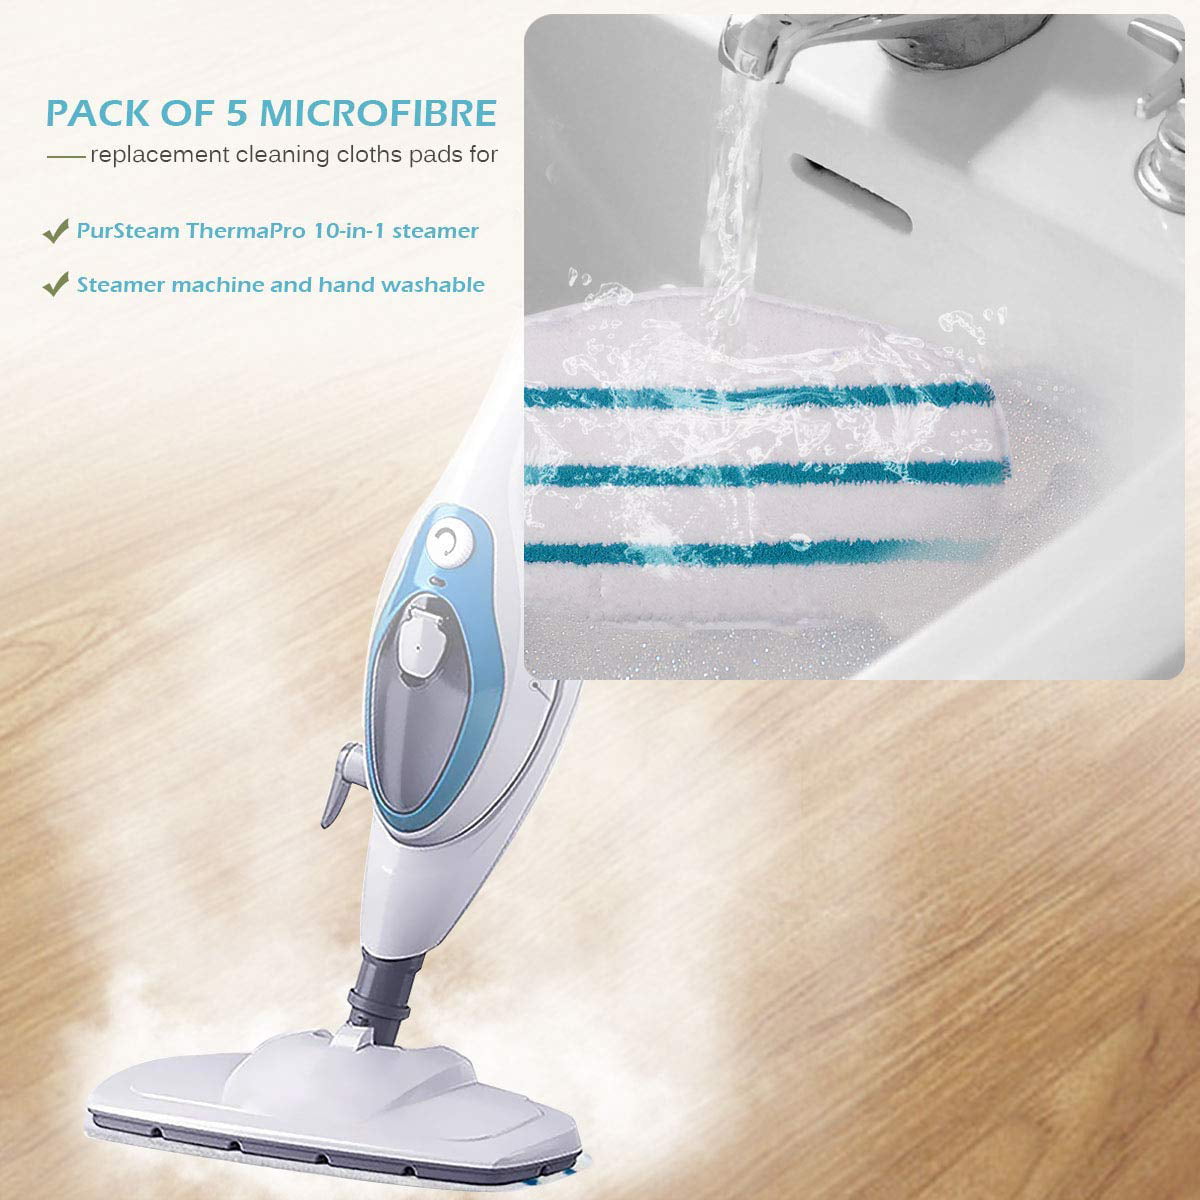 LhhTing 8 Pack Replacement Steam Mop Pads Compatible with PurSteam ThermaPro 10-in-1